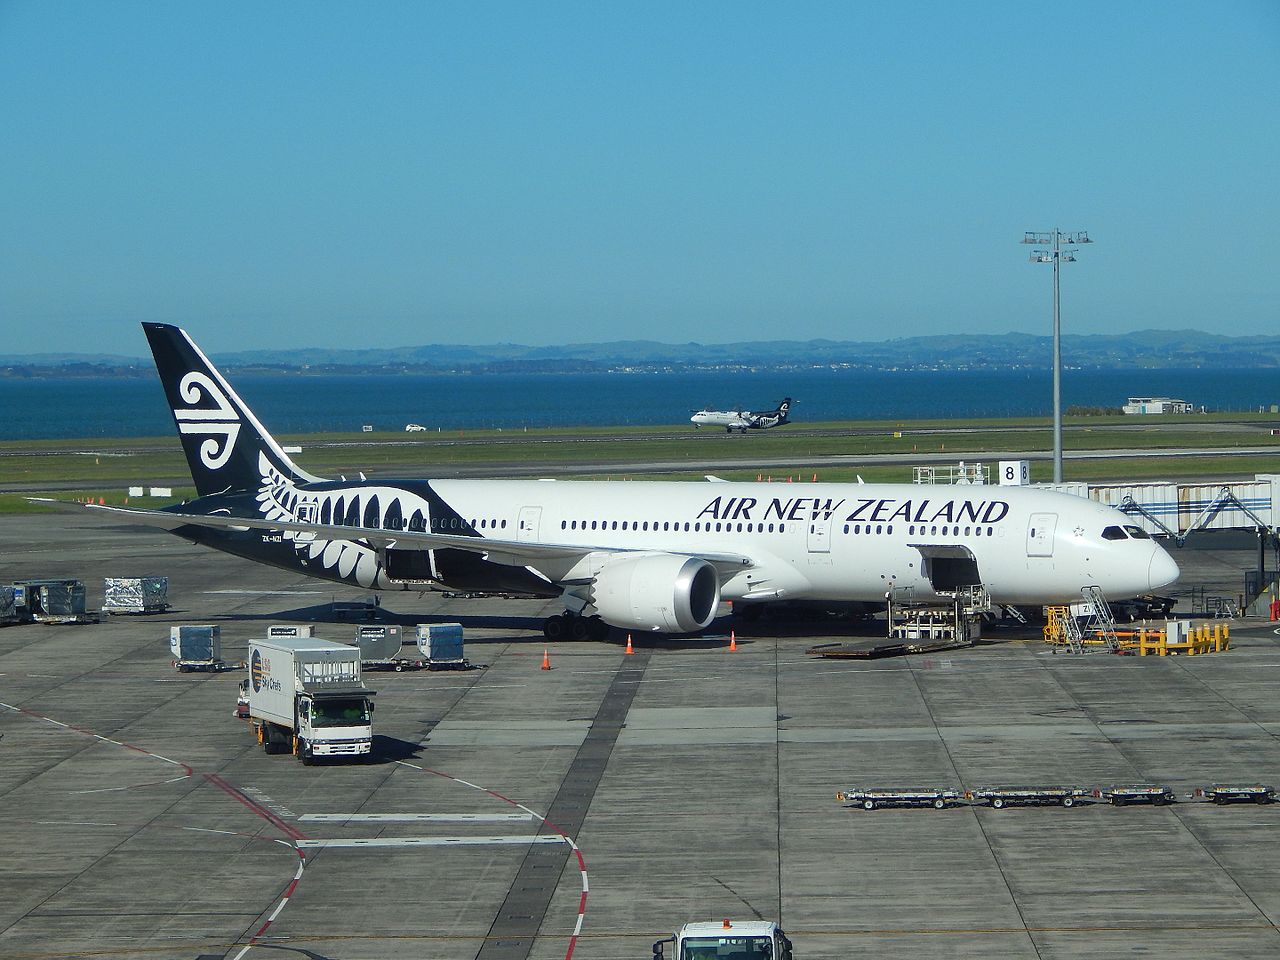 Multi-billion-dollar investment planned for Auckland Airport